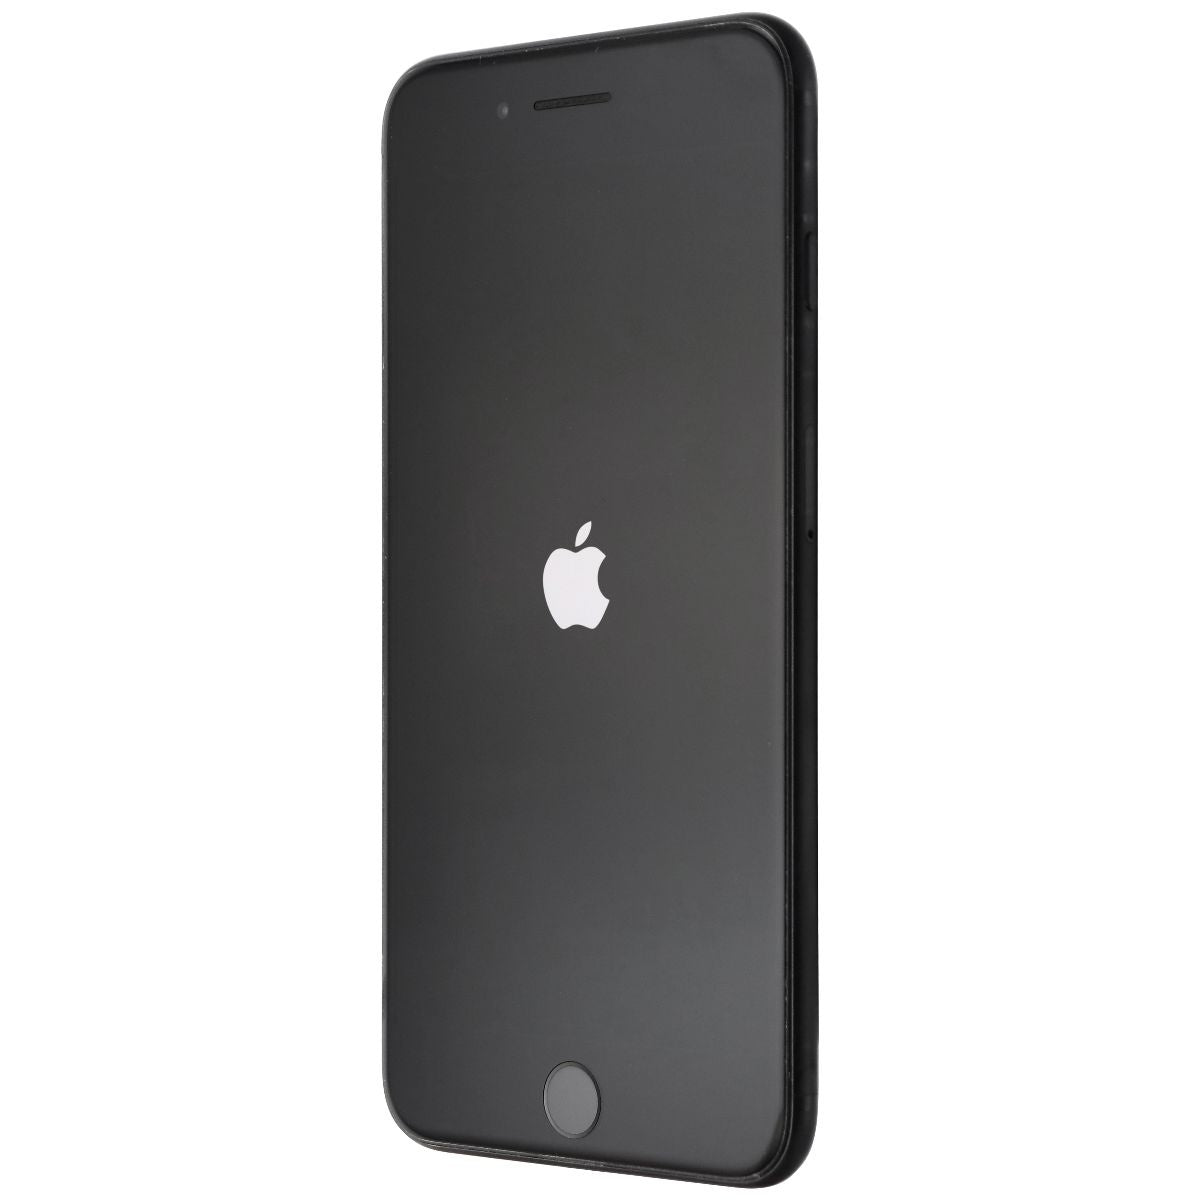 Apple iPhone 7 Plus (5.5-in) Smartphone (A1661) GSM + CDMA - 128GB / Black Cell Phones & Smartphones Apple    - Simple Cell Bulk Wholesale Pricing - USA Seller